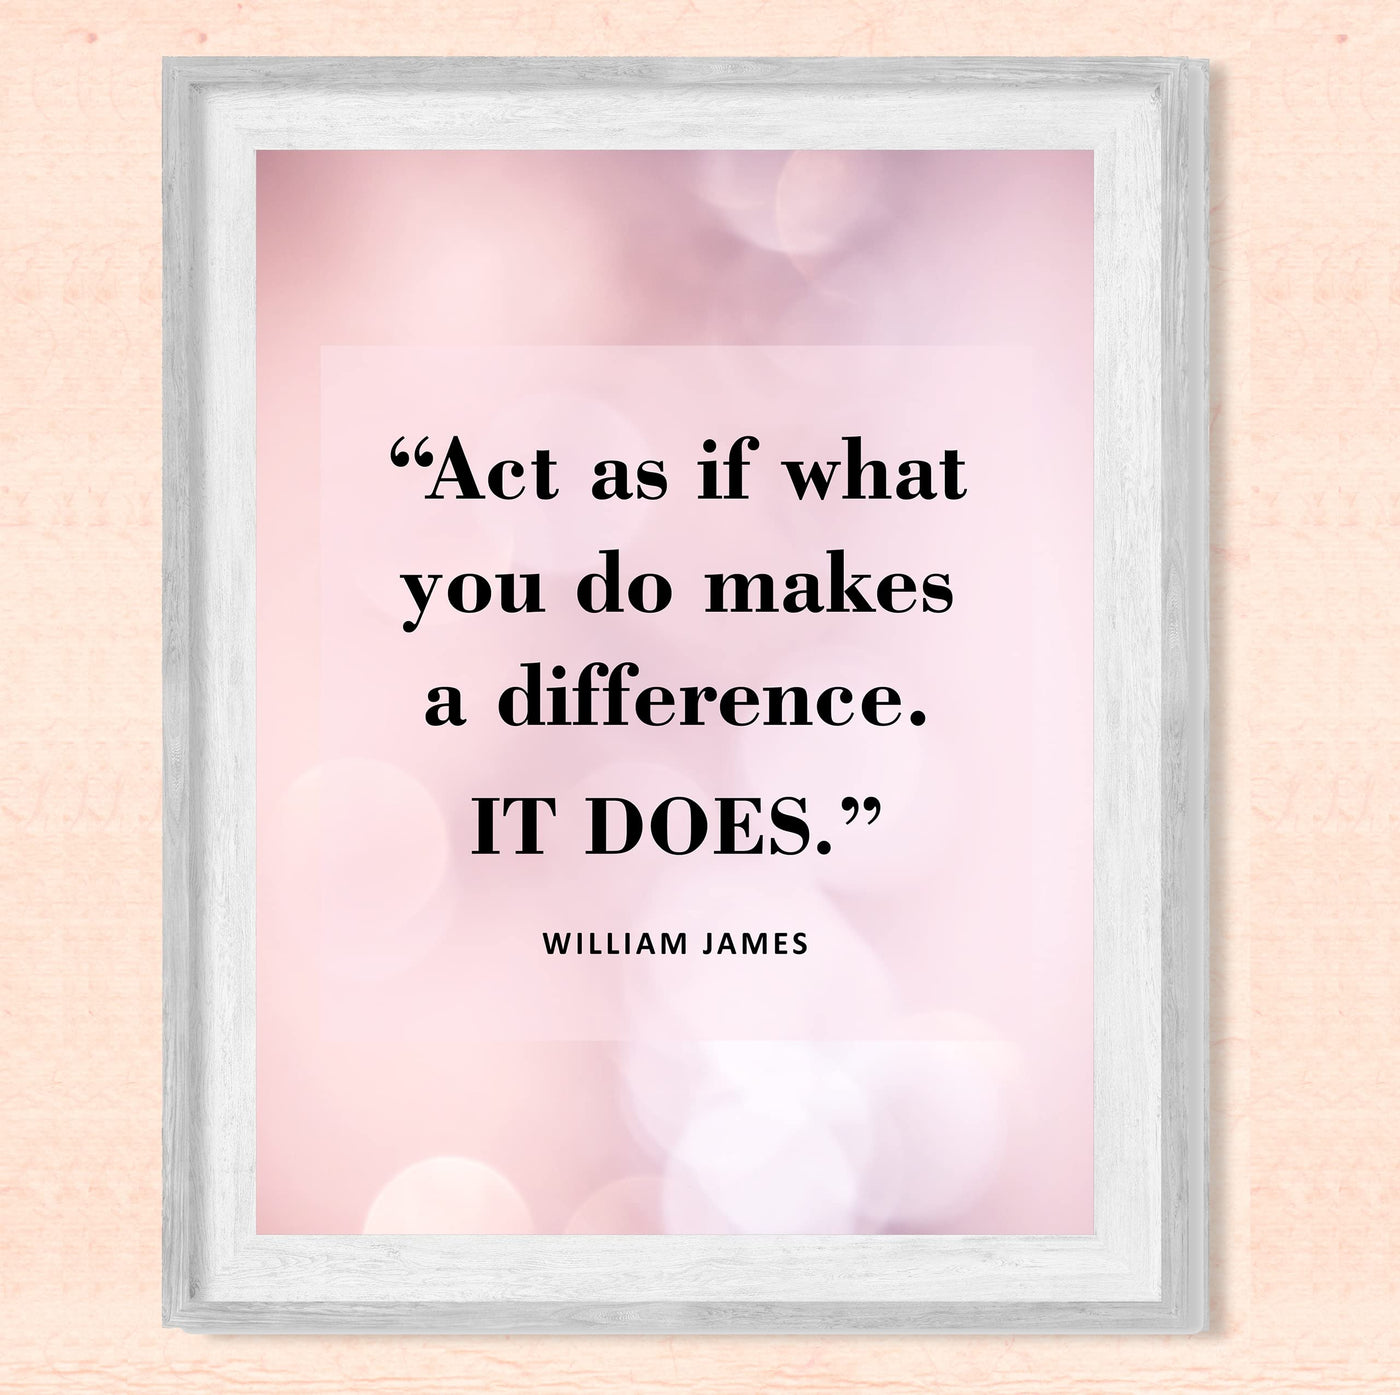 Act As If What You Do Makes A Difference Motivational Quotes Wall Decor -8 x 10" Inspirational Art Print-Ready to Frame. Modern Home-Office-Desk-School-Positive Decor. Great Gift of Motivation!